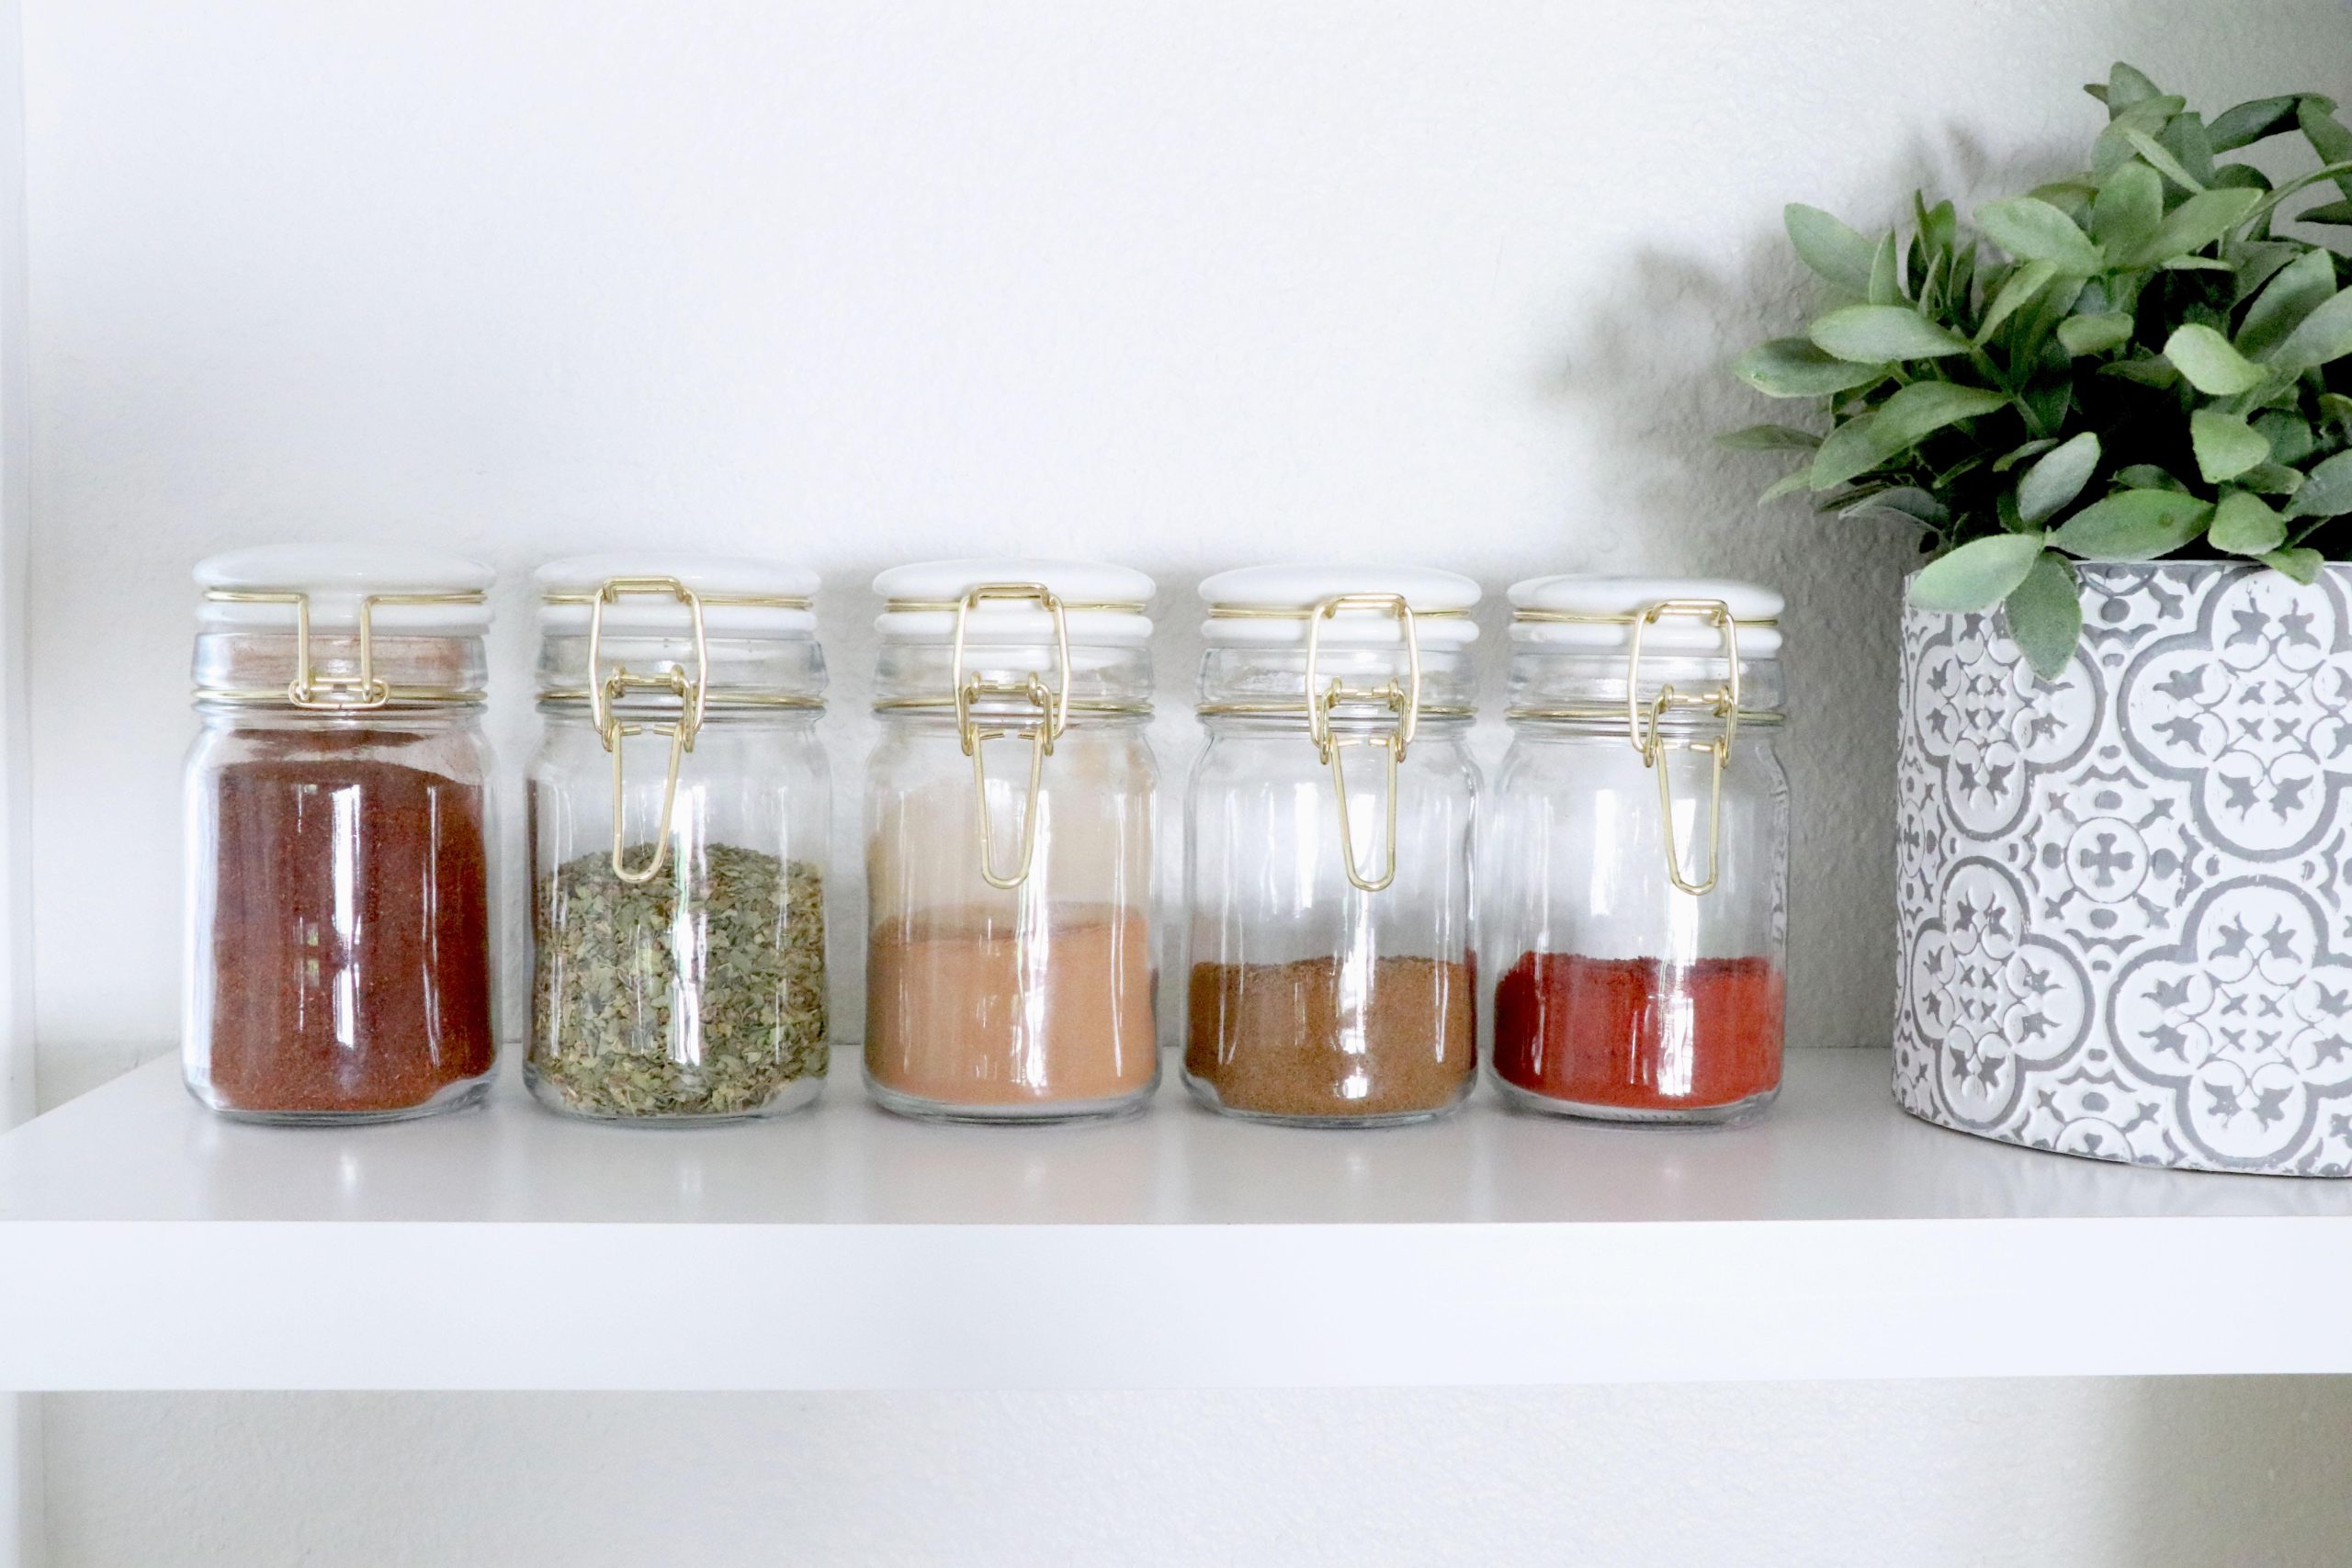 The Top 5 Spices You Need In Your Pantry and How to Use Them